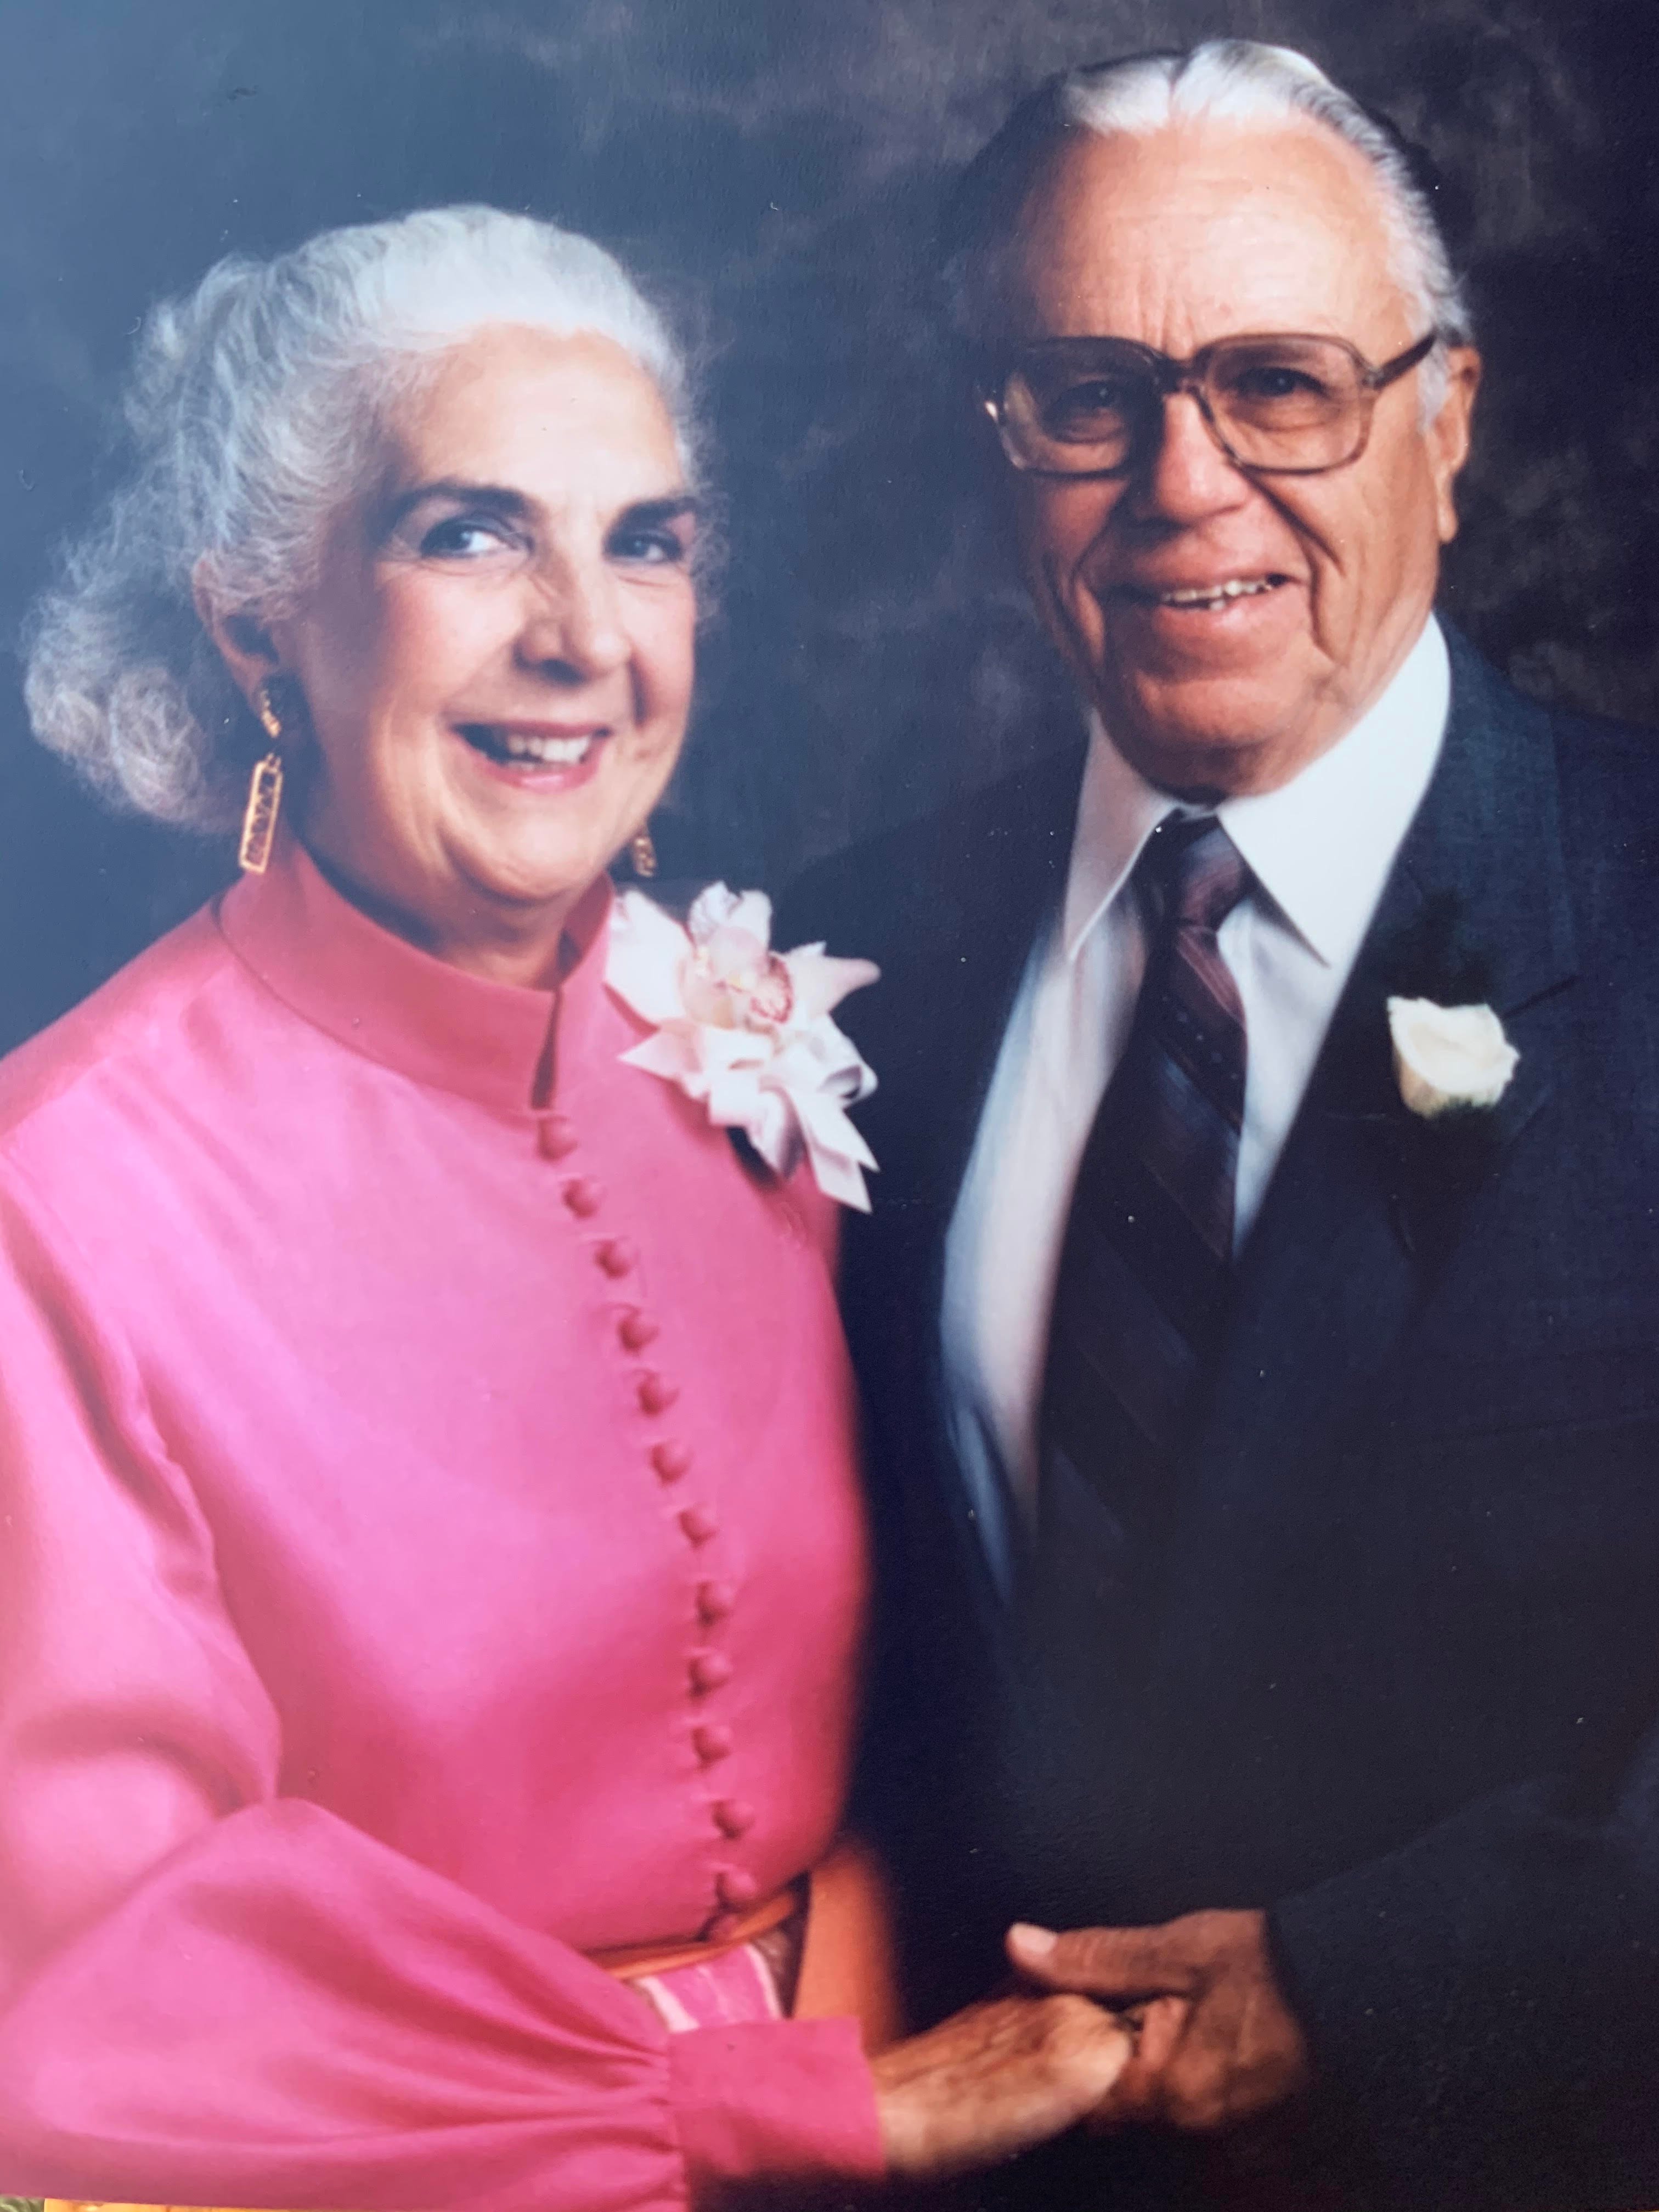 My great-grandparents Sarah and Dale Lundstrom and